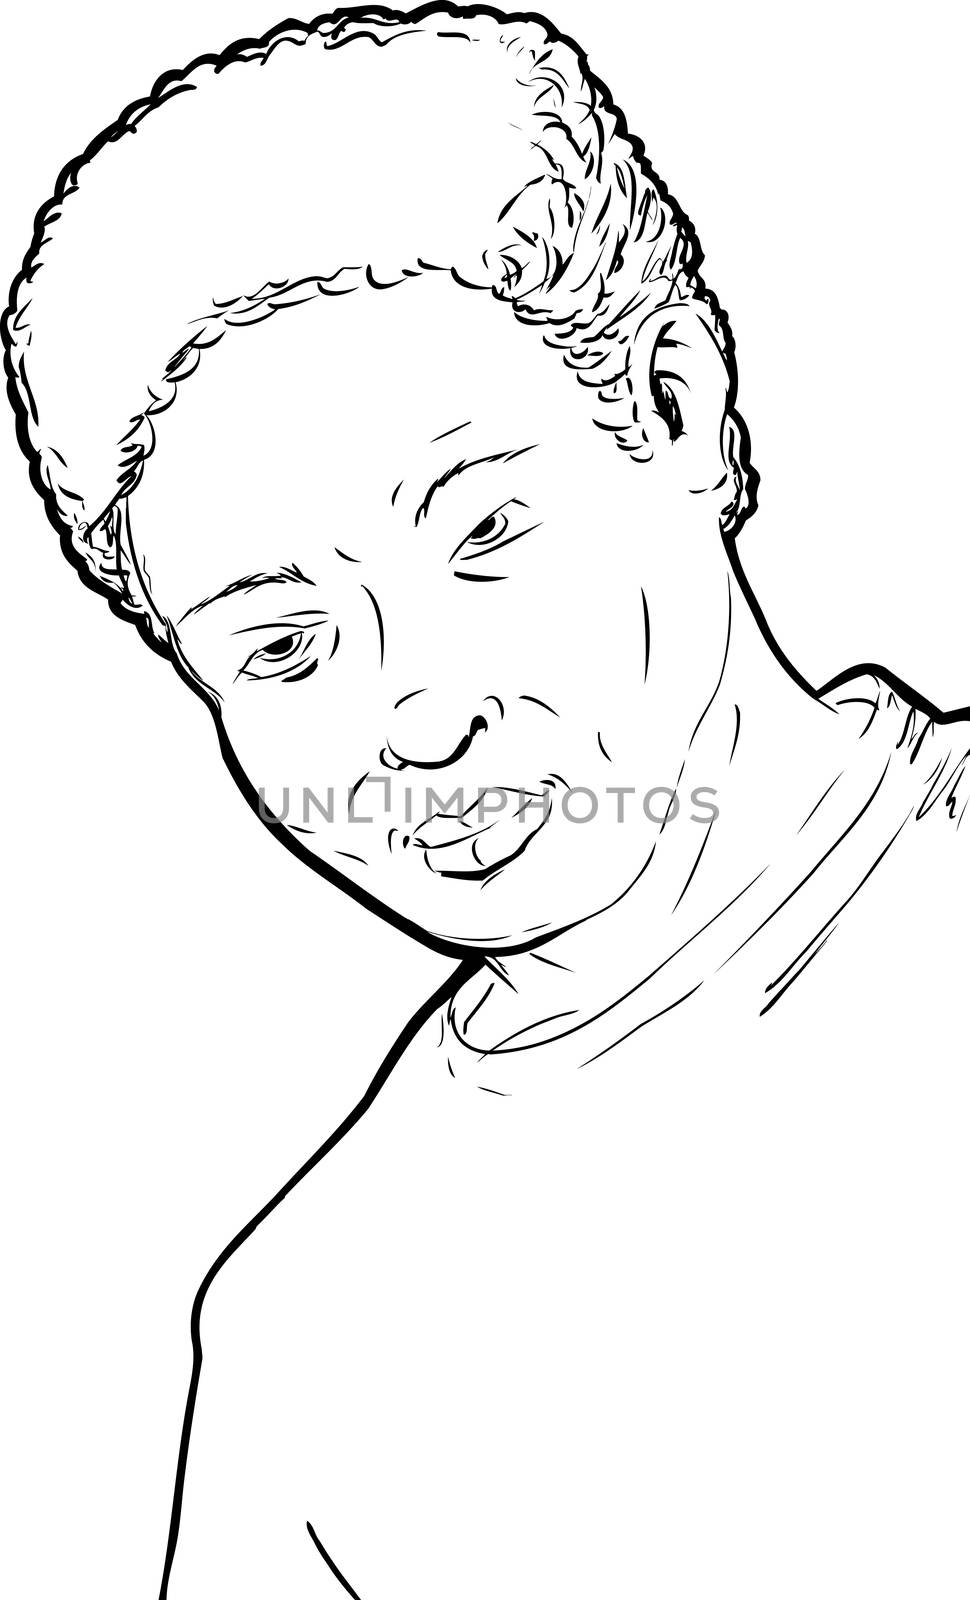 Outline illustration of calm handsome young man with grin